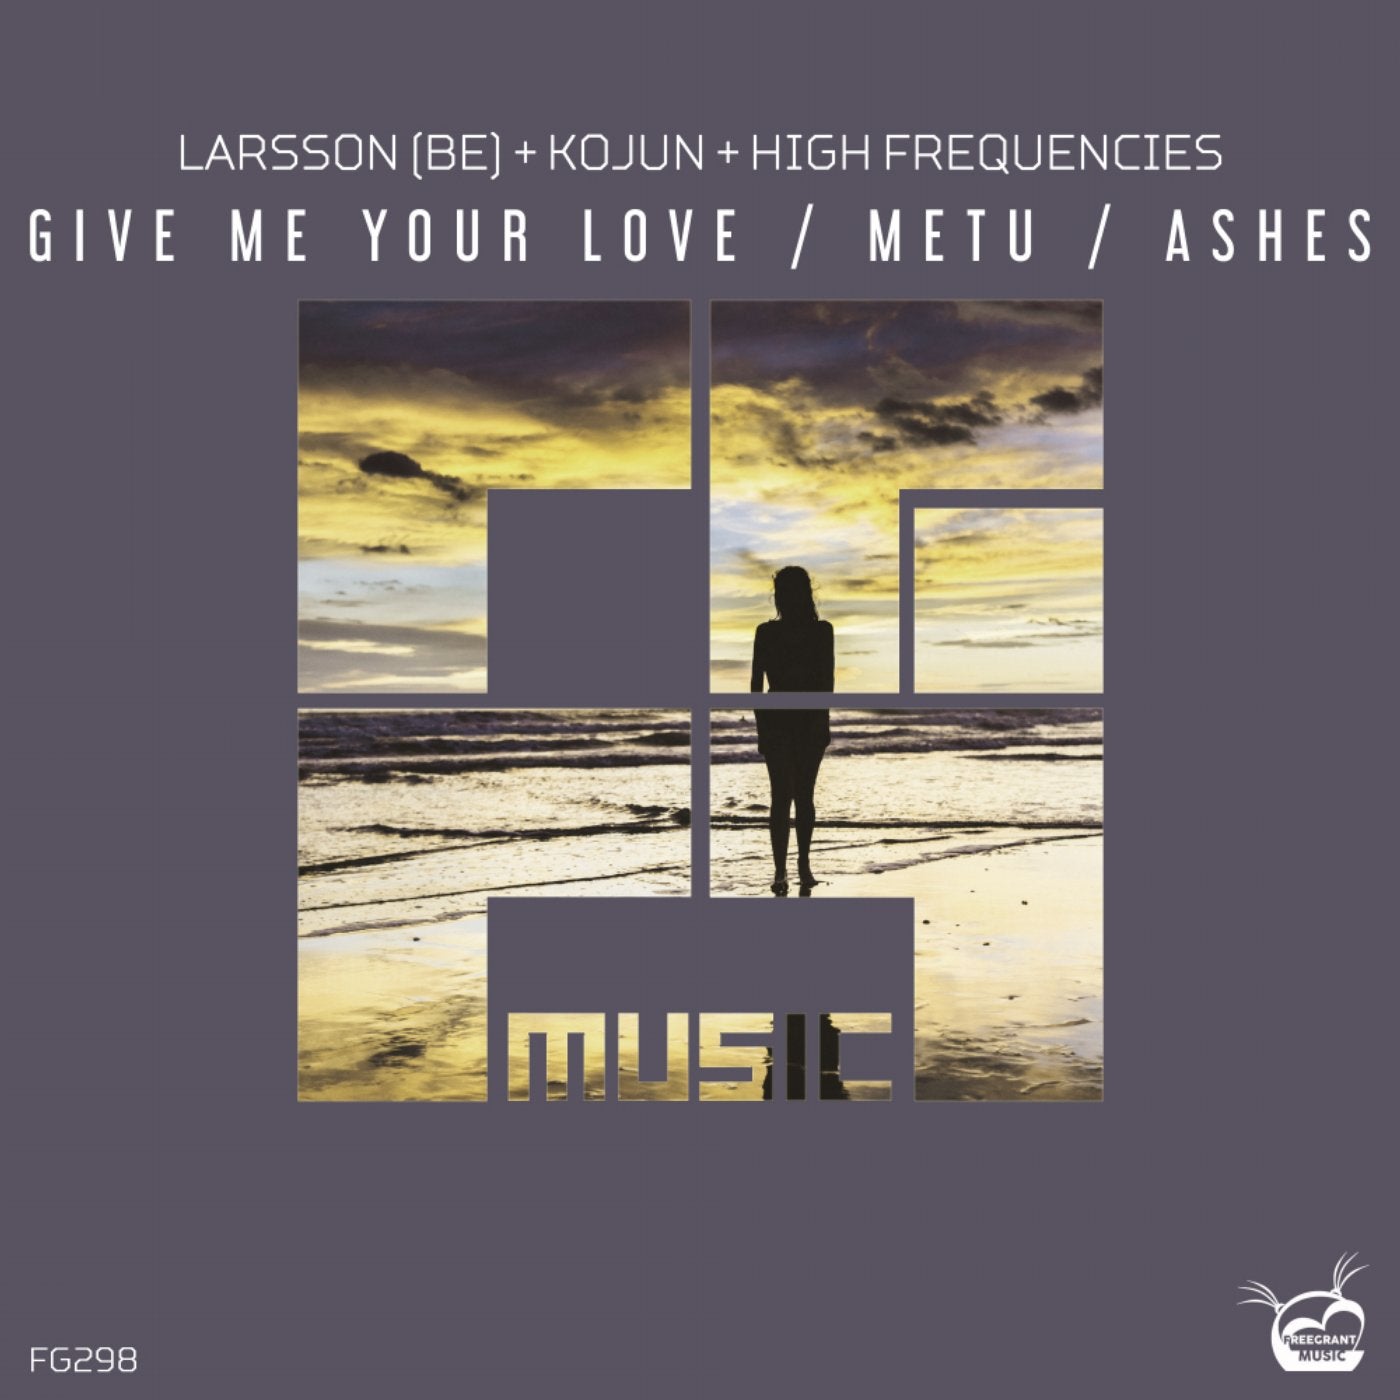 Give Me Your Love / Metu / Ashes